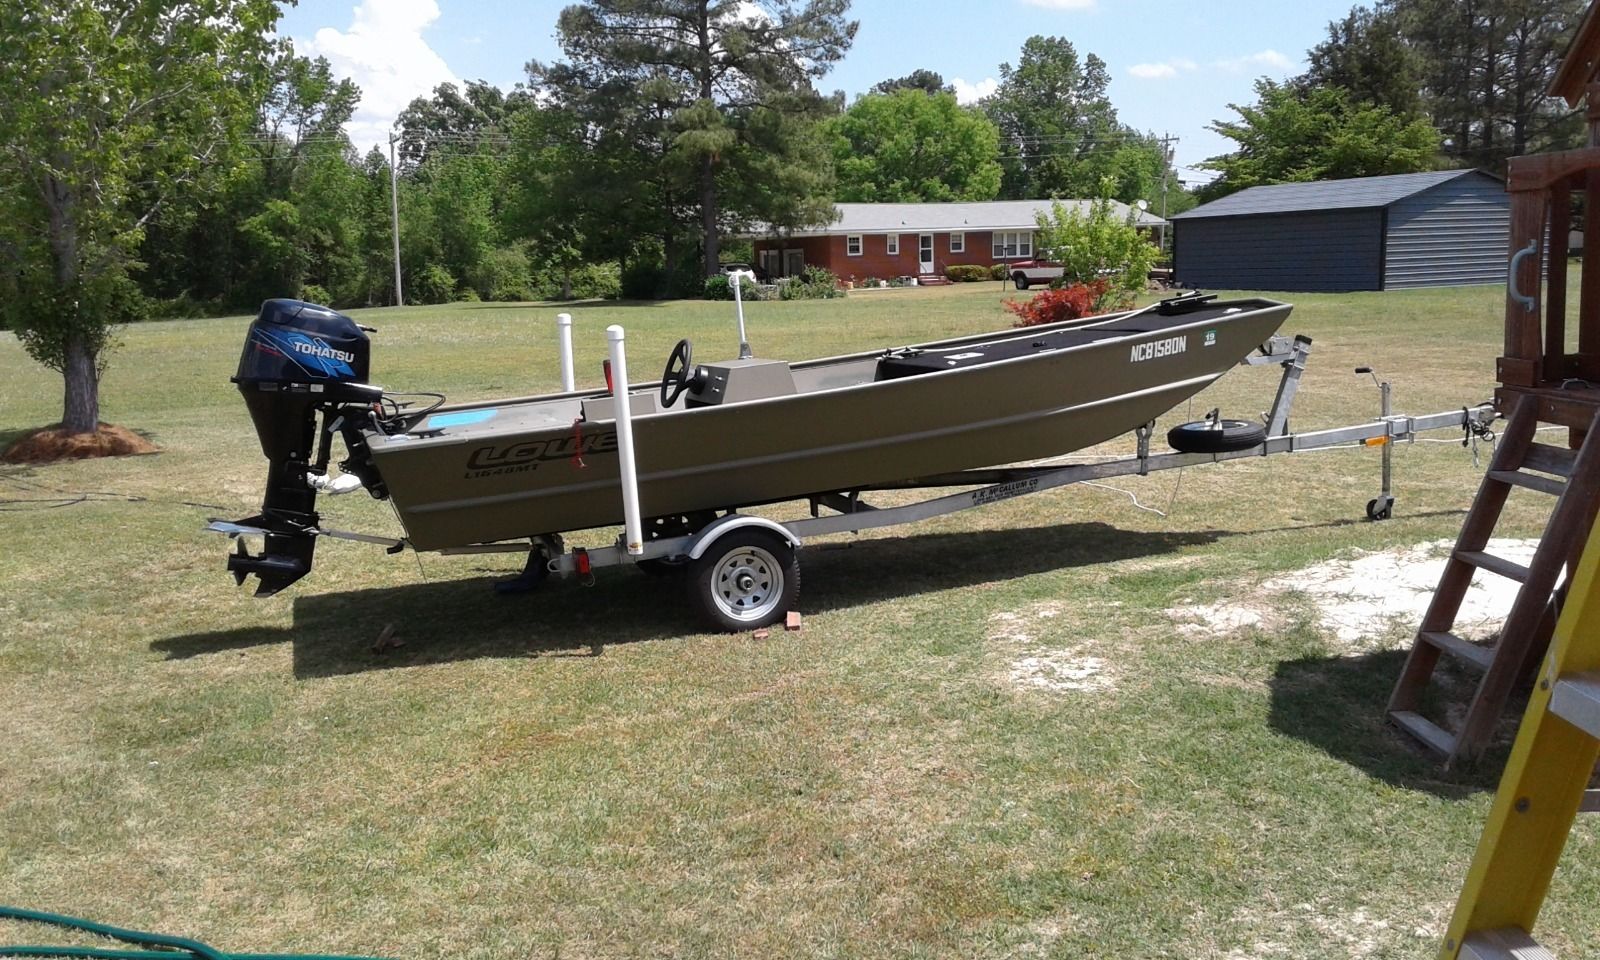 Lowe 1648 2009 for sale for $5,500 - Boats-from-USA.com